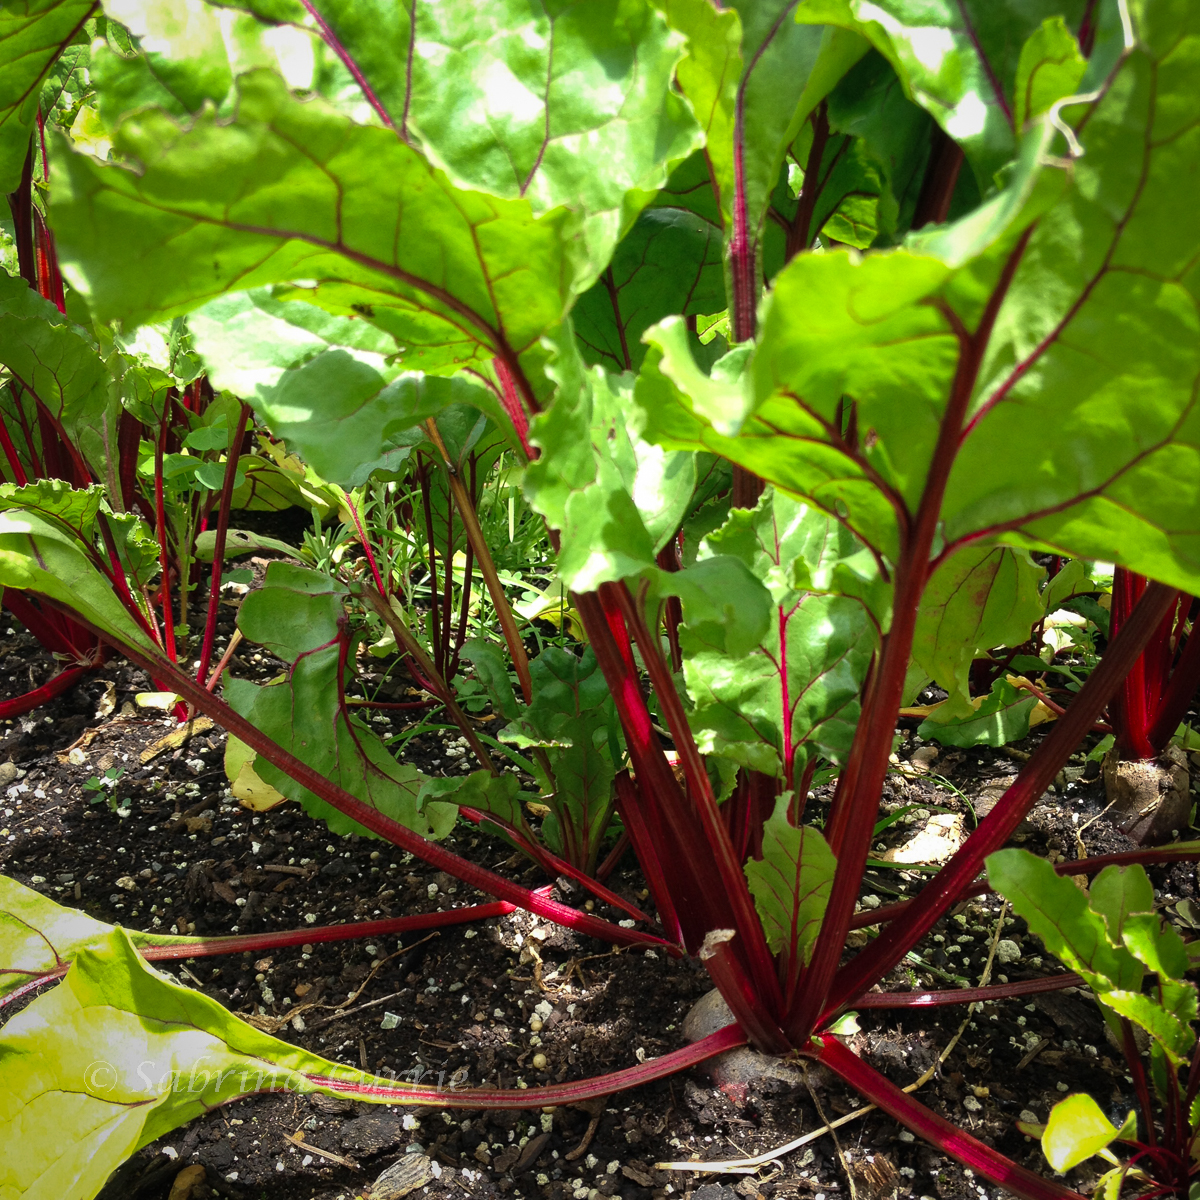 Beets growing in a garden with tall green and red leaves towering above them.